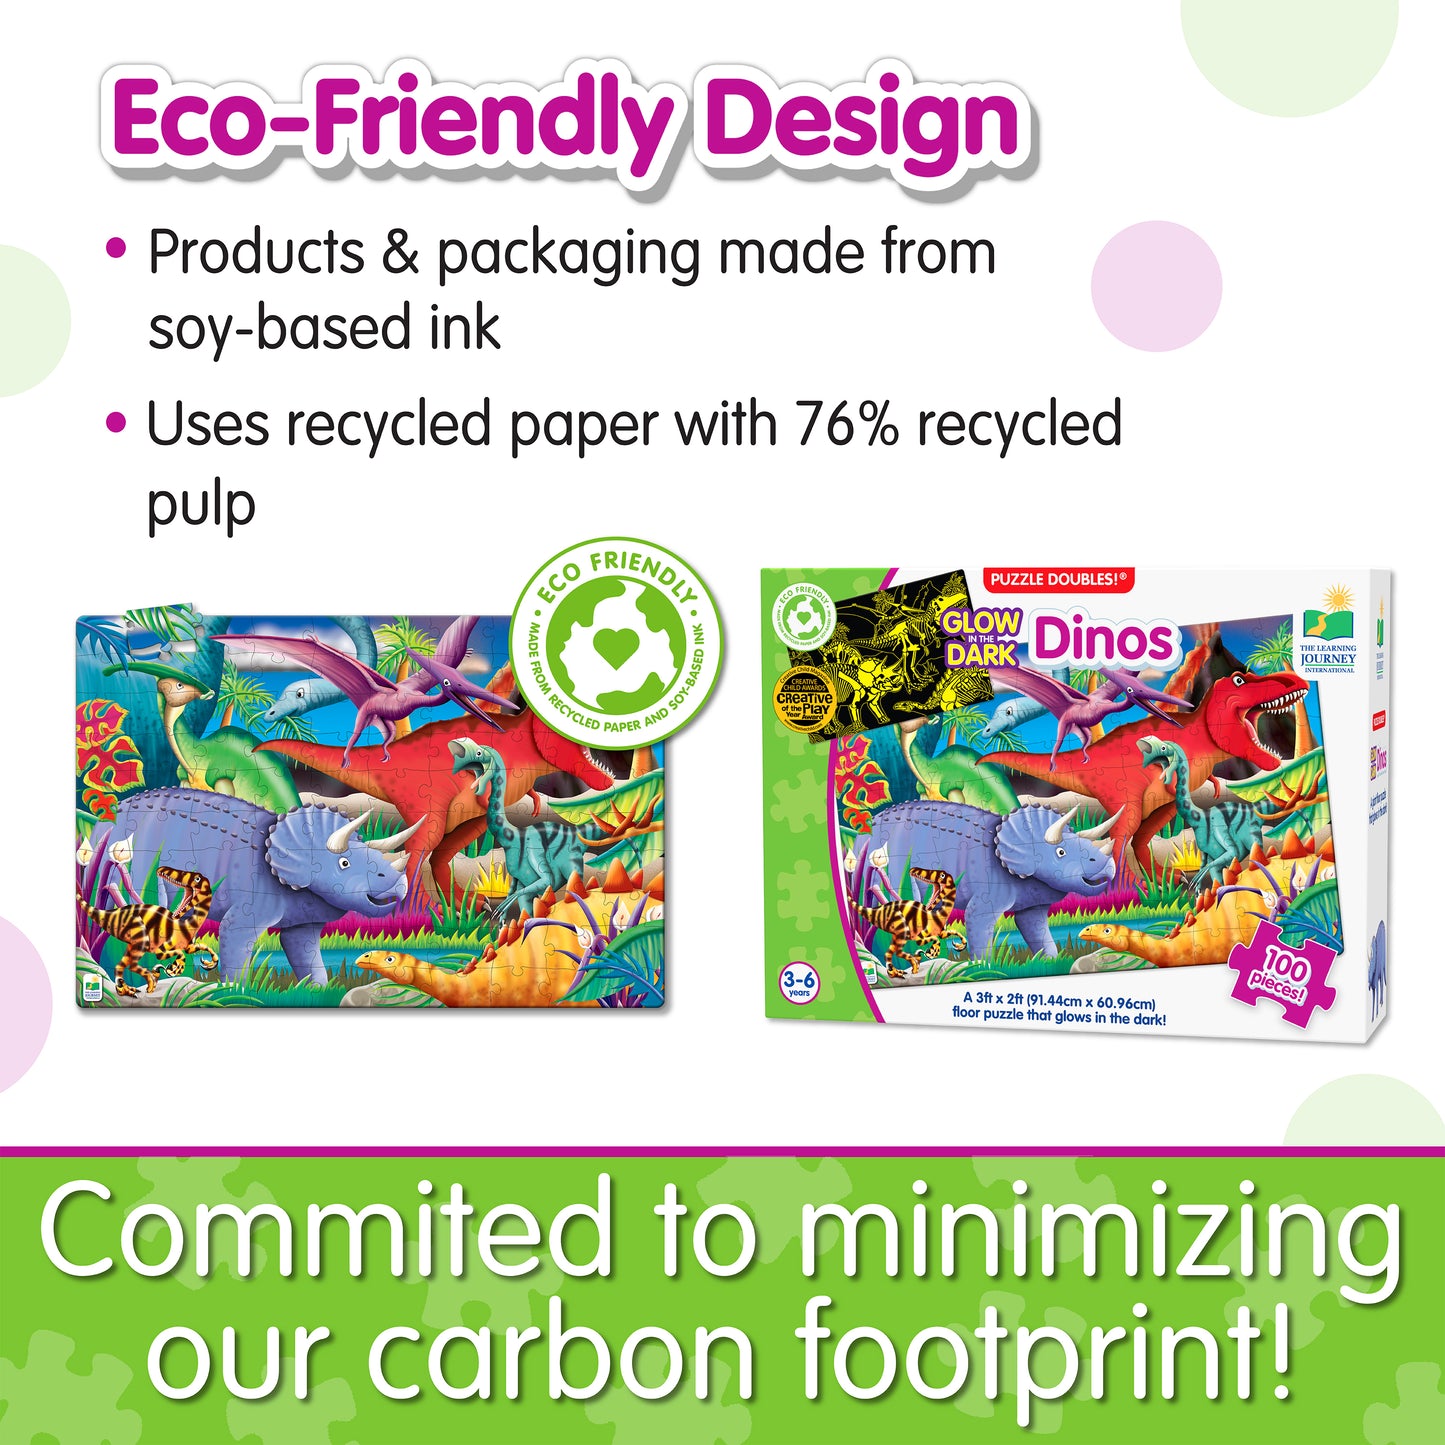 Infographic about Glow in the Dark - Dinos' eco-friendly design that says, "Committed to minimizing our carbon footprint!"